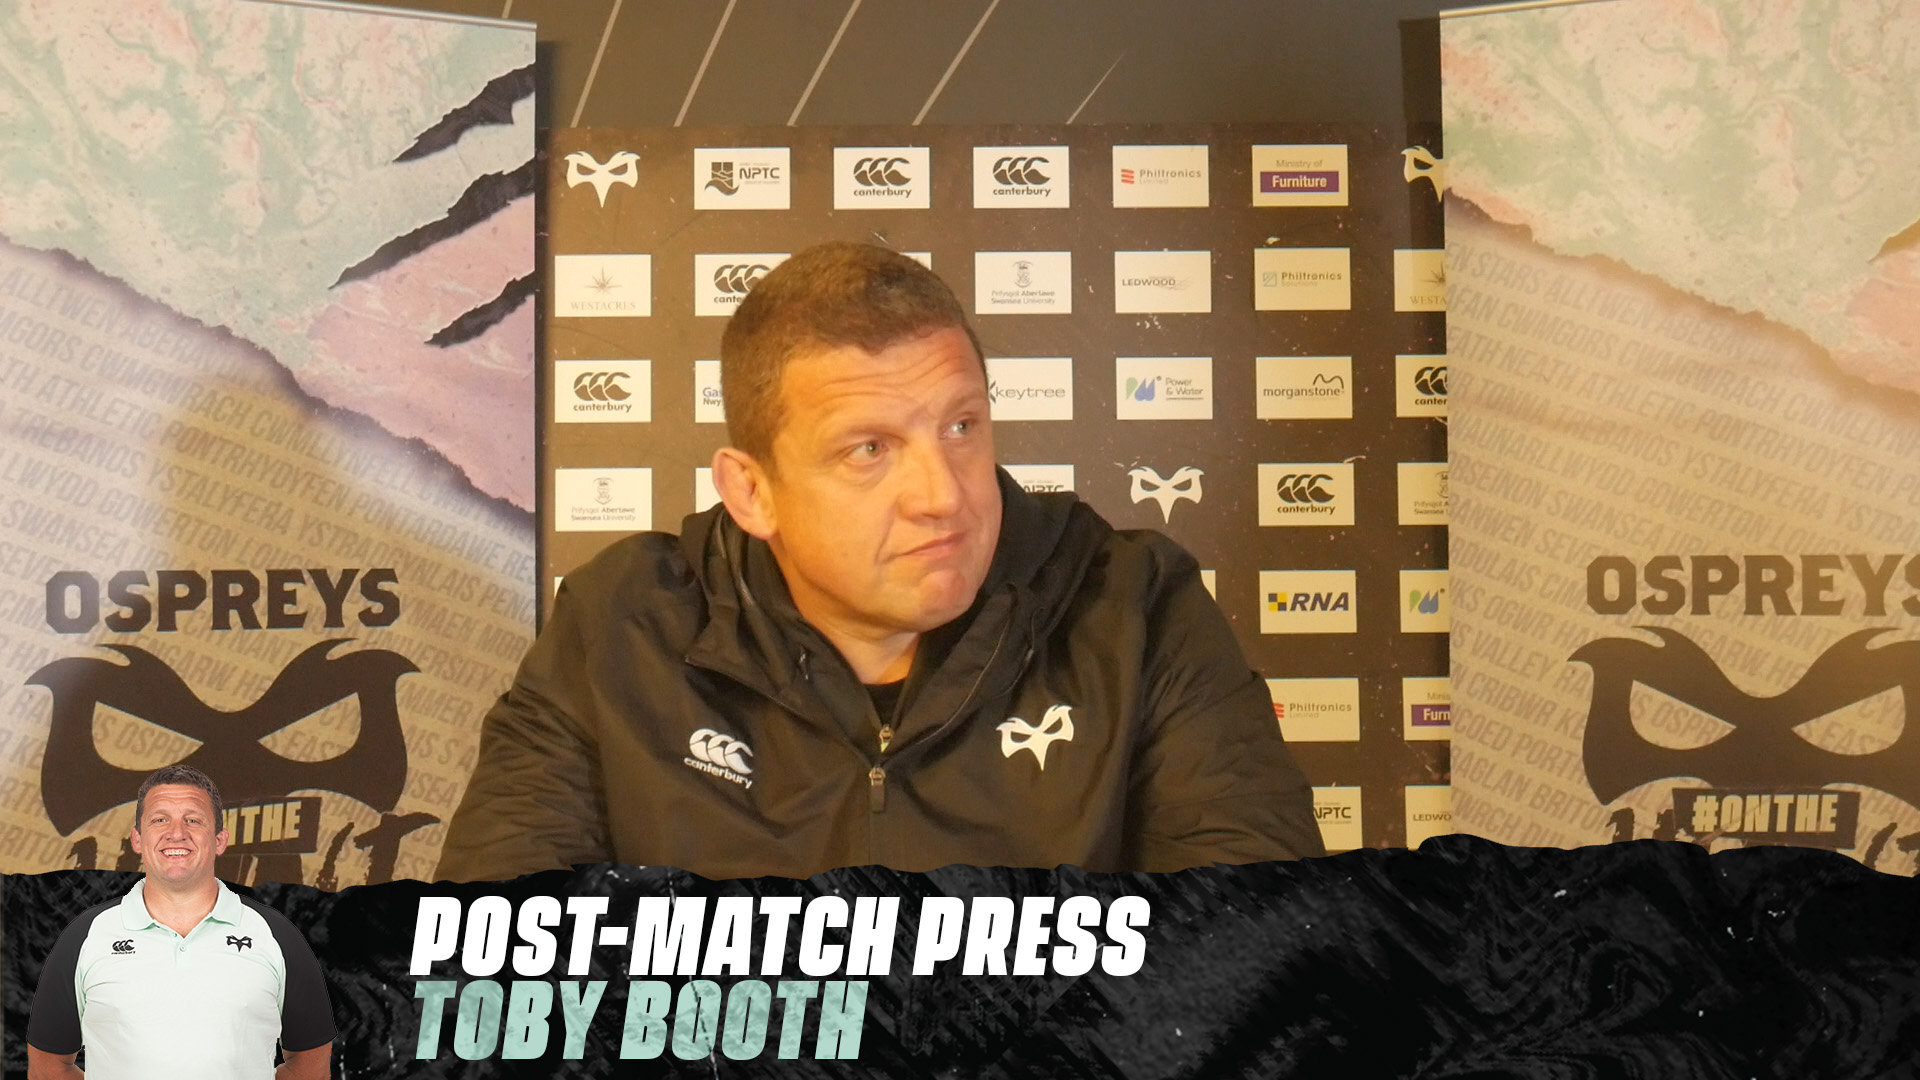 POST-MATCH PRESS: Toby Booth (Ospreys 7-26 Leinster)